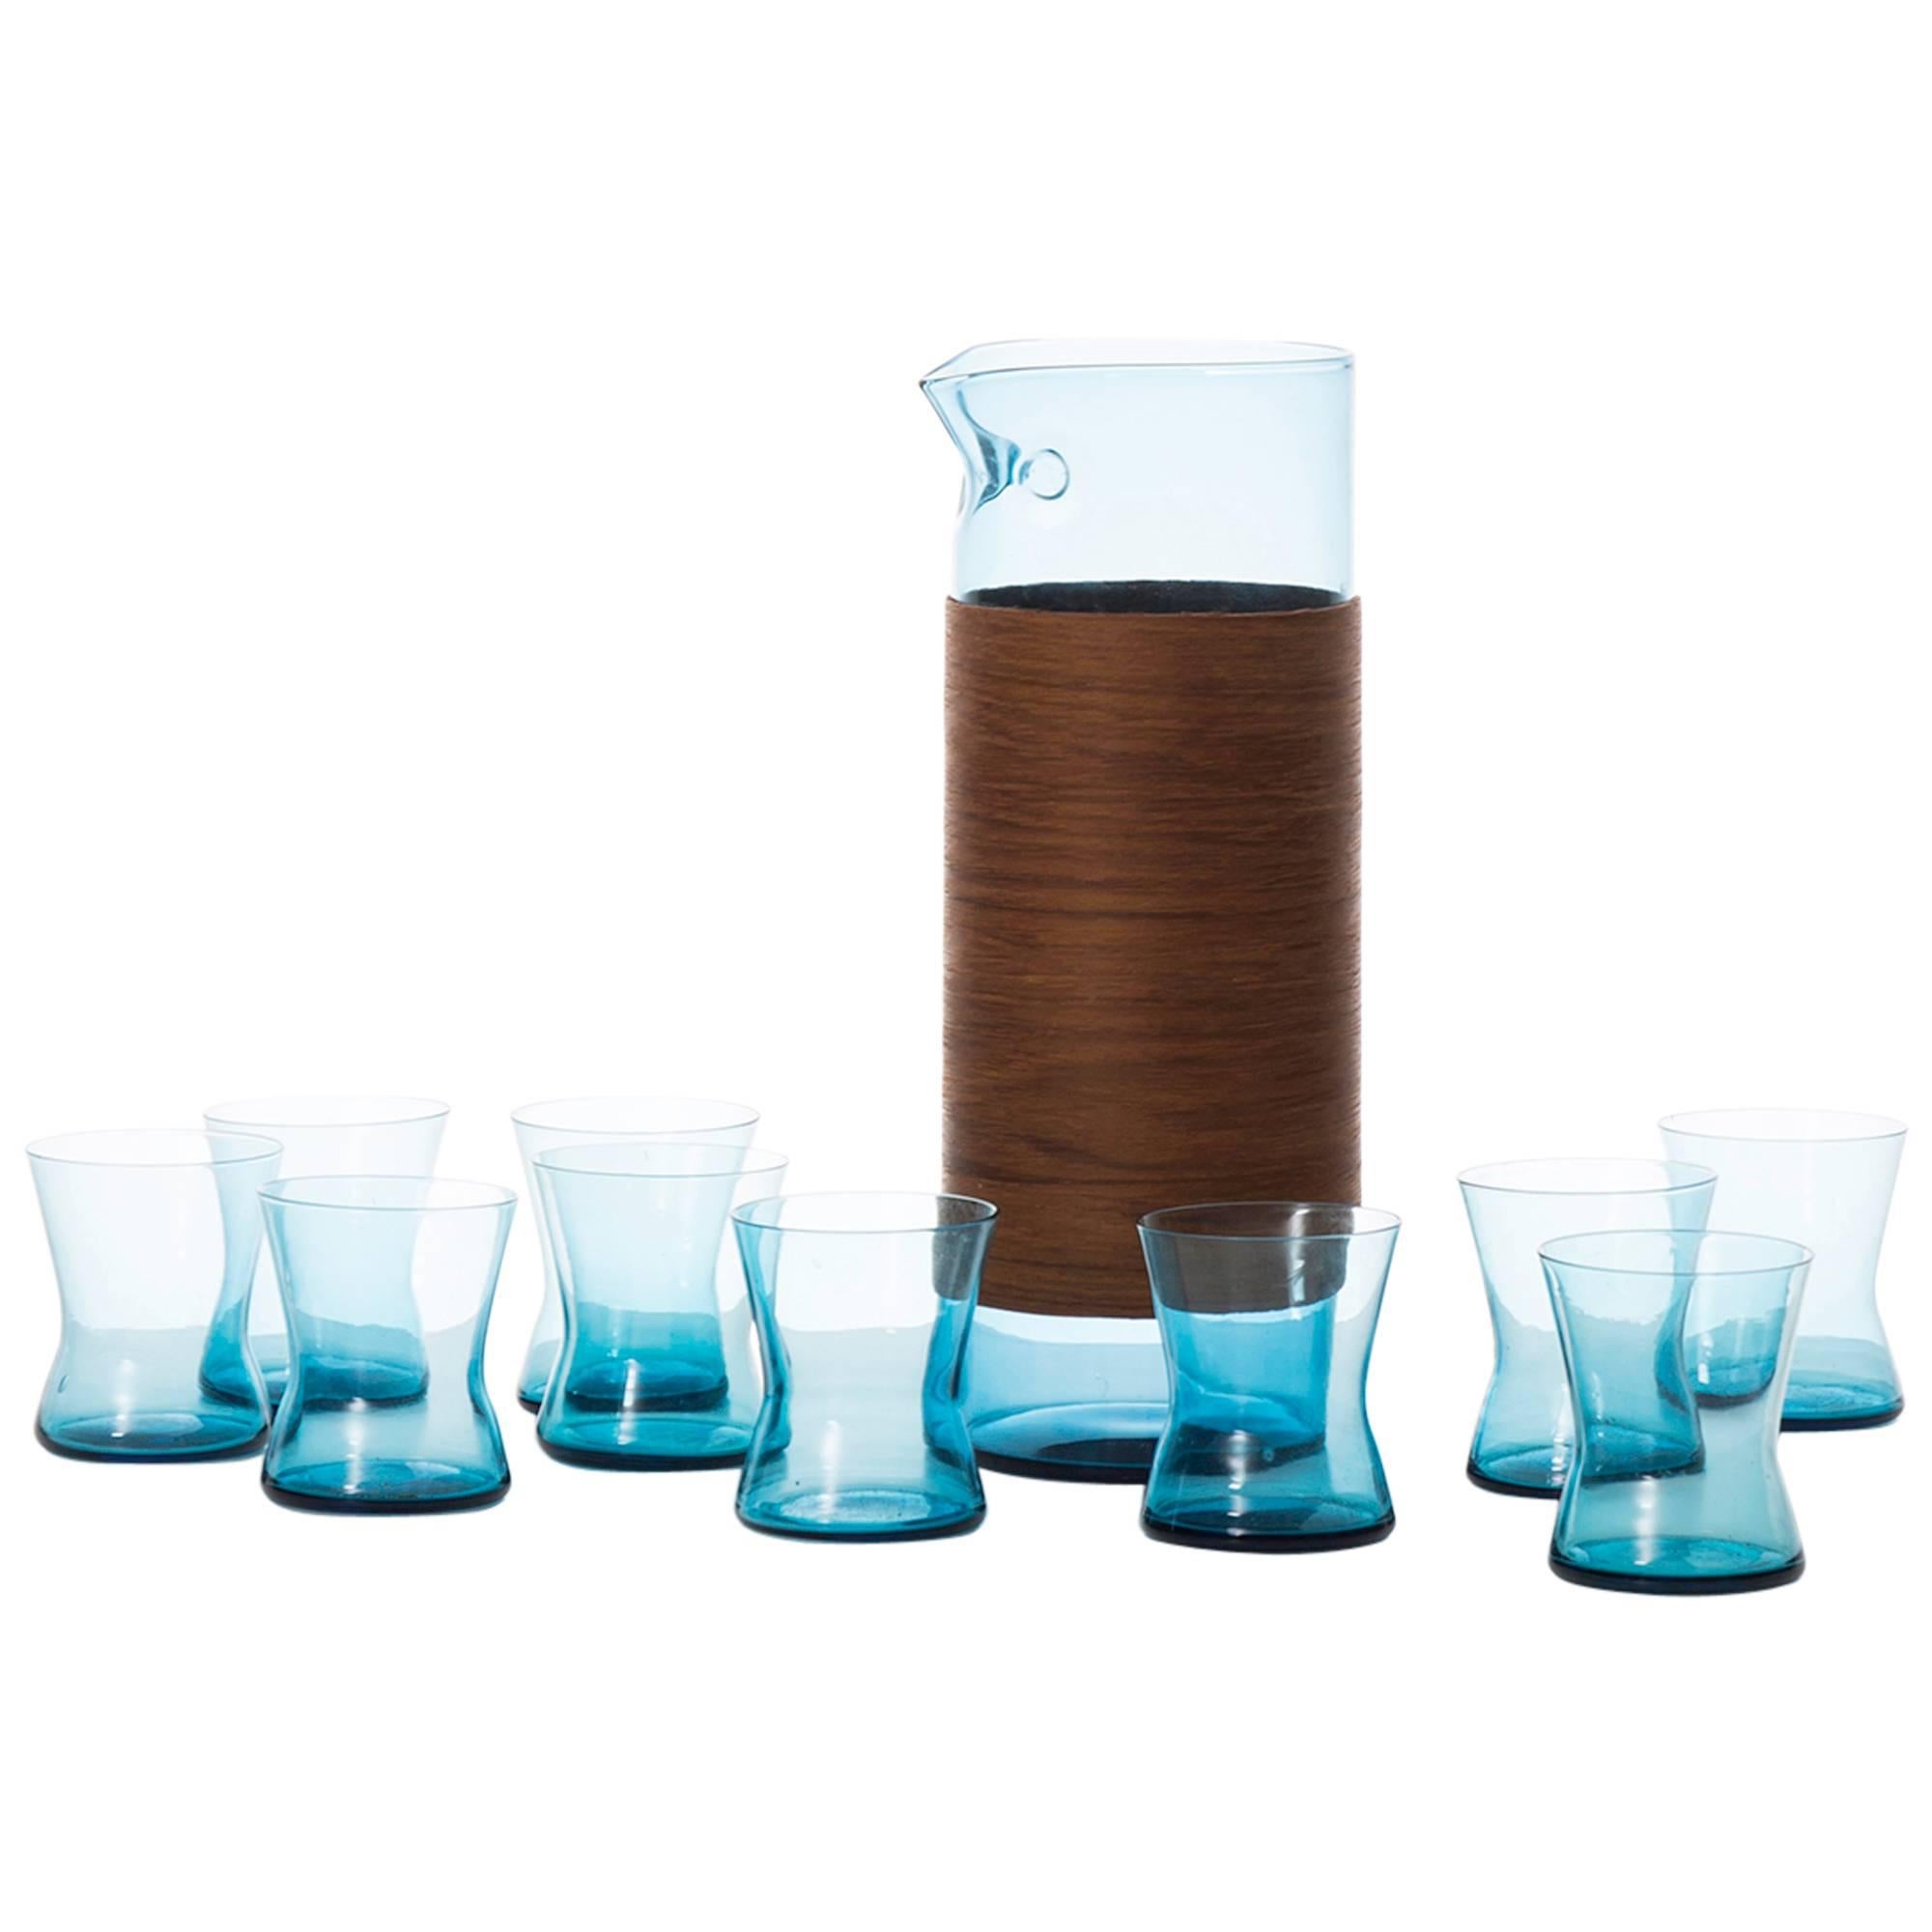 Set of Ten Glasses and a Carafe Produced in Finland